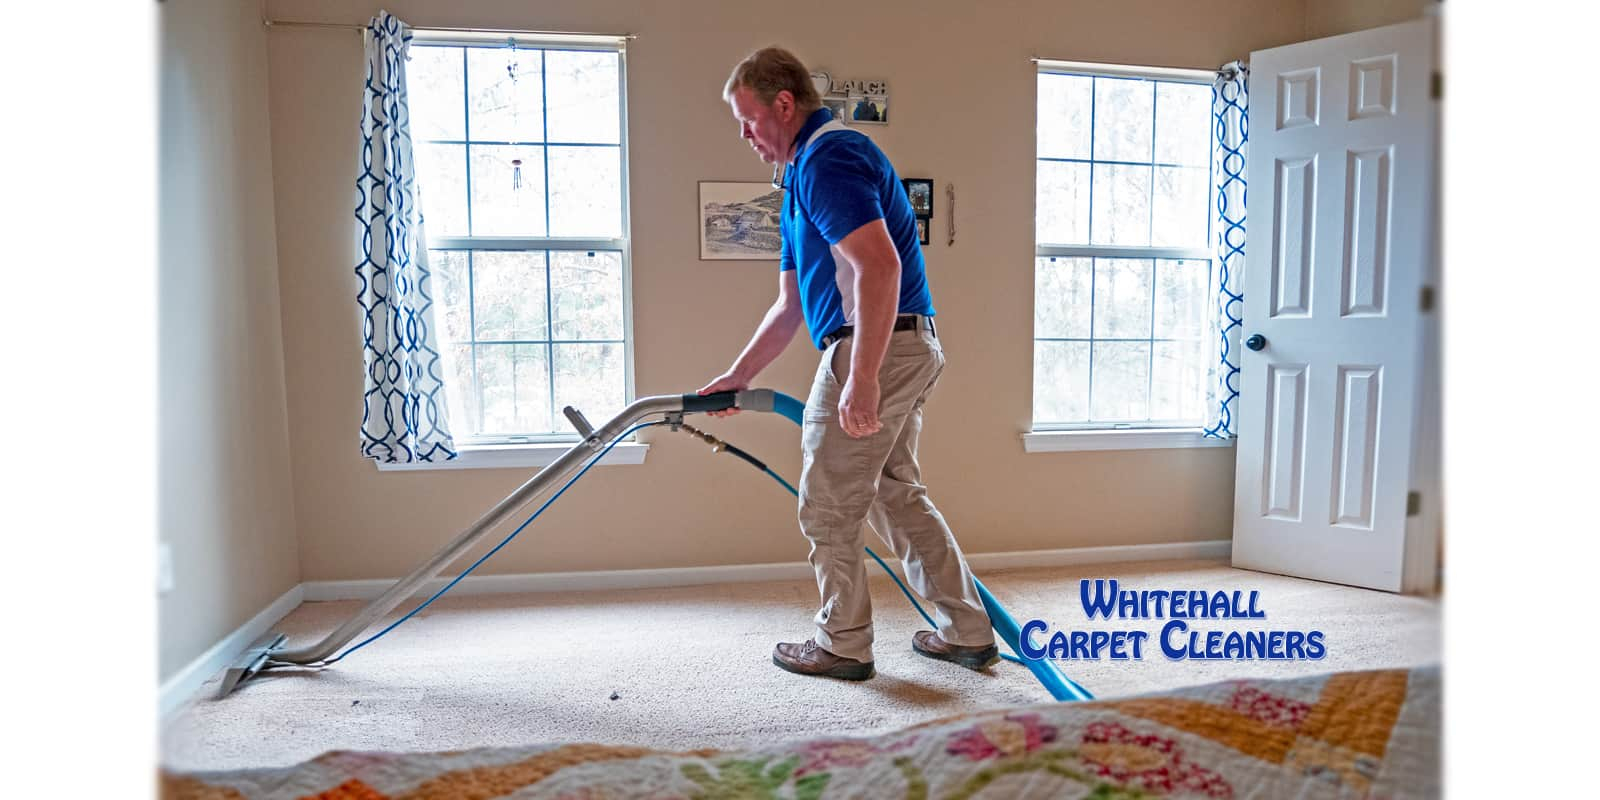 Whitehall Carpet Cleaning In Columbia Sc serapportantà Carpet Cleaners Pitt County Nc